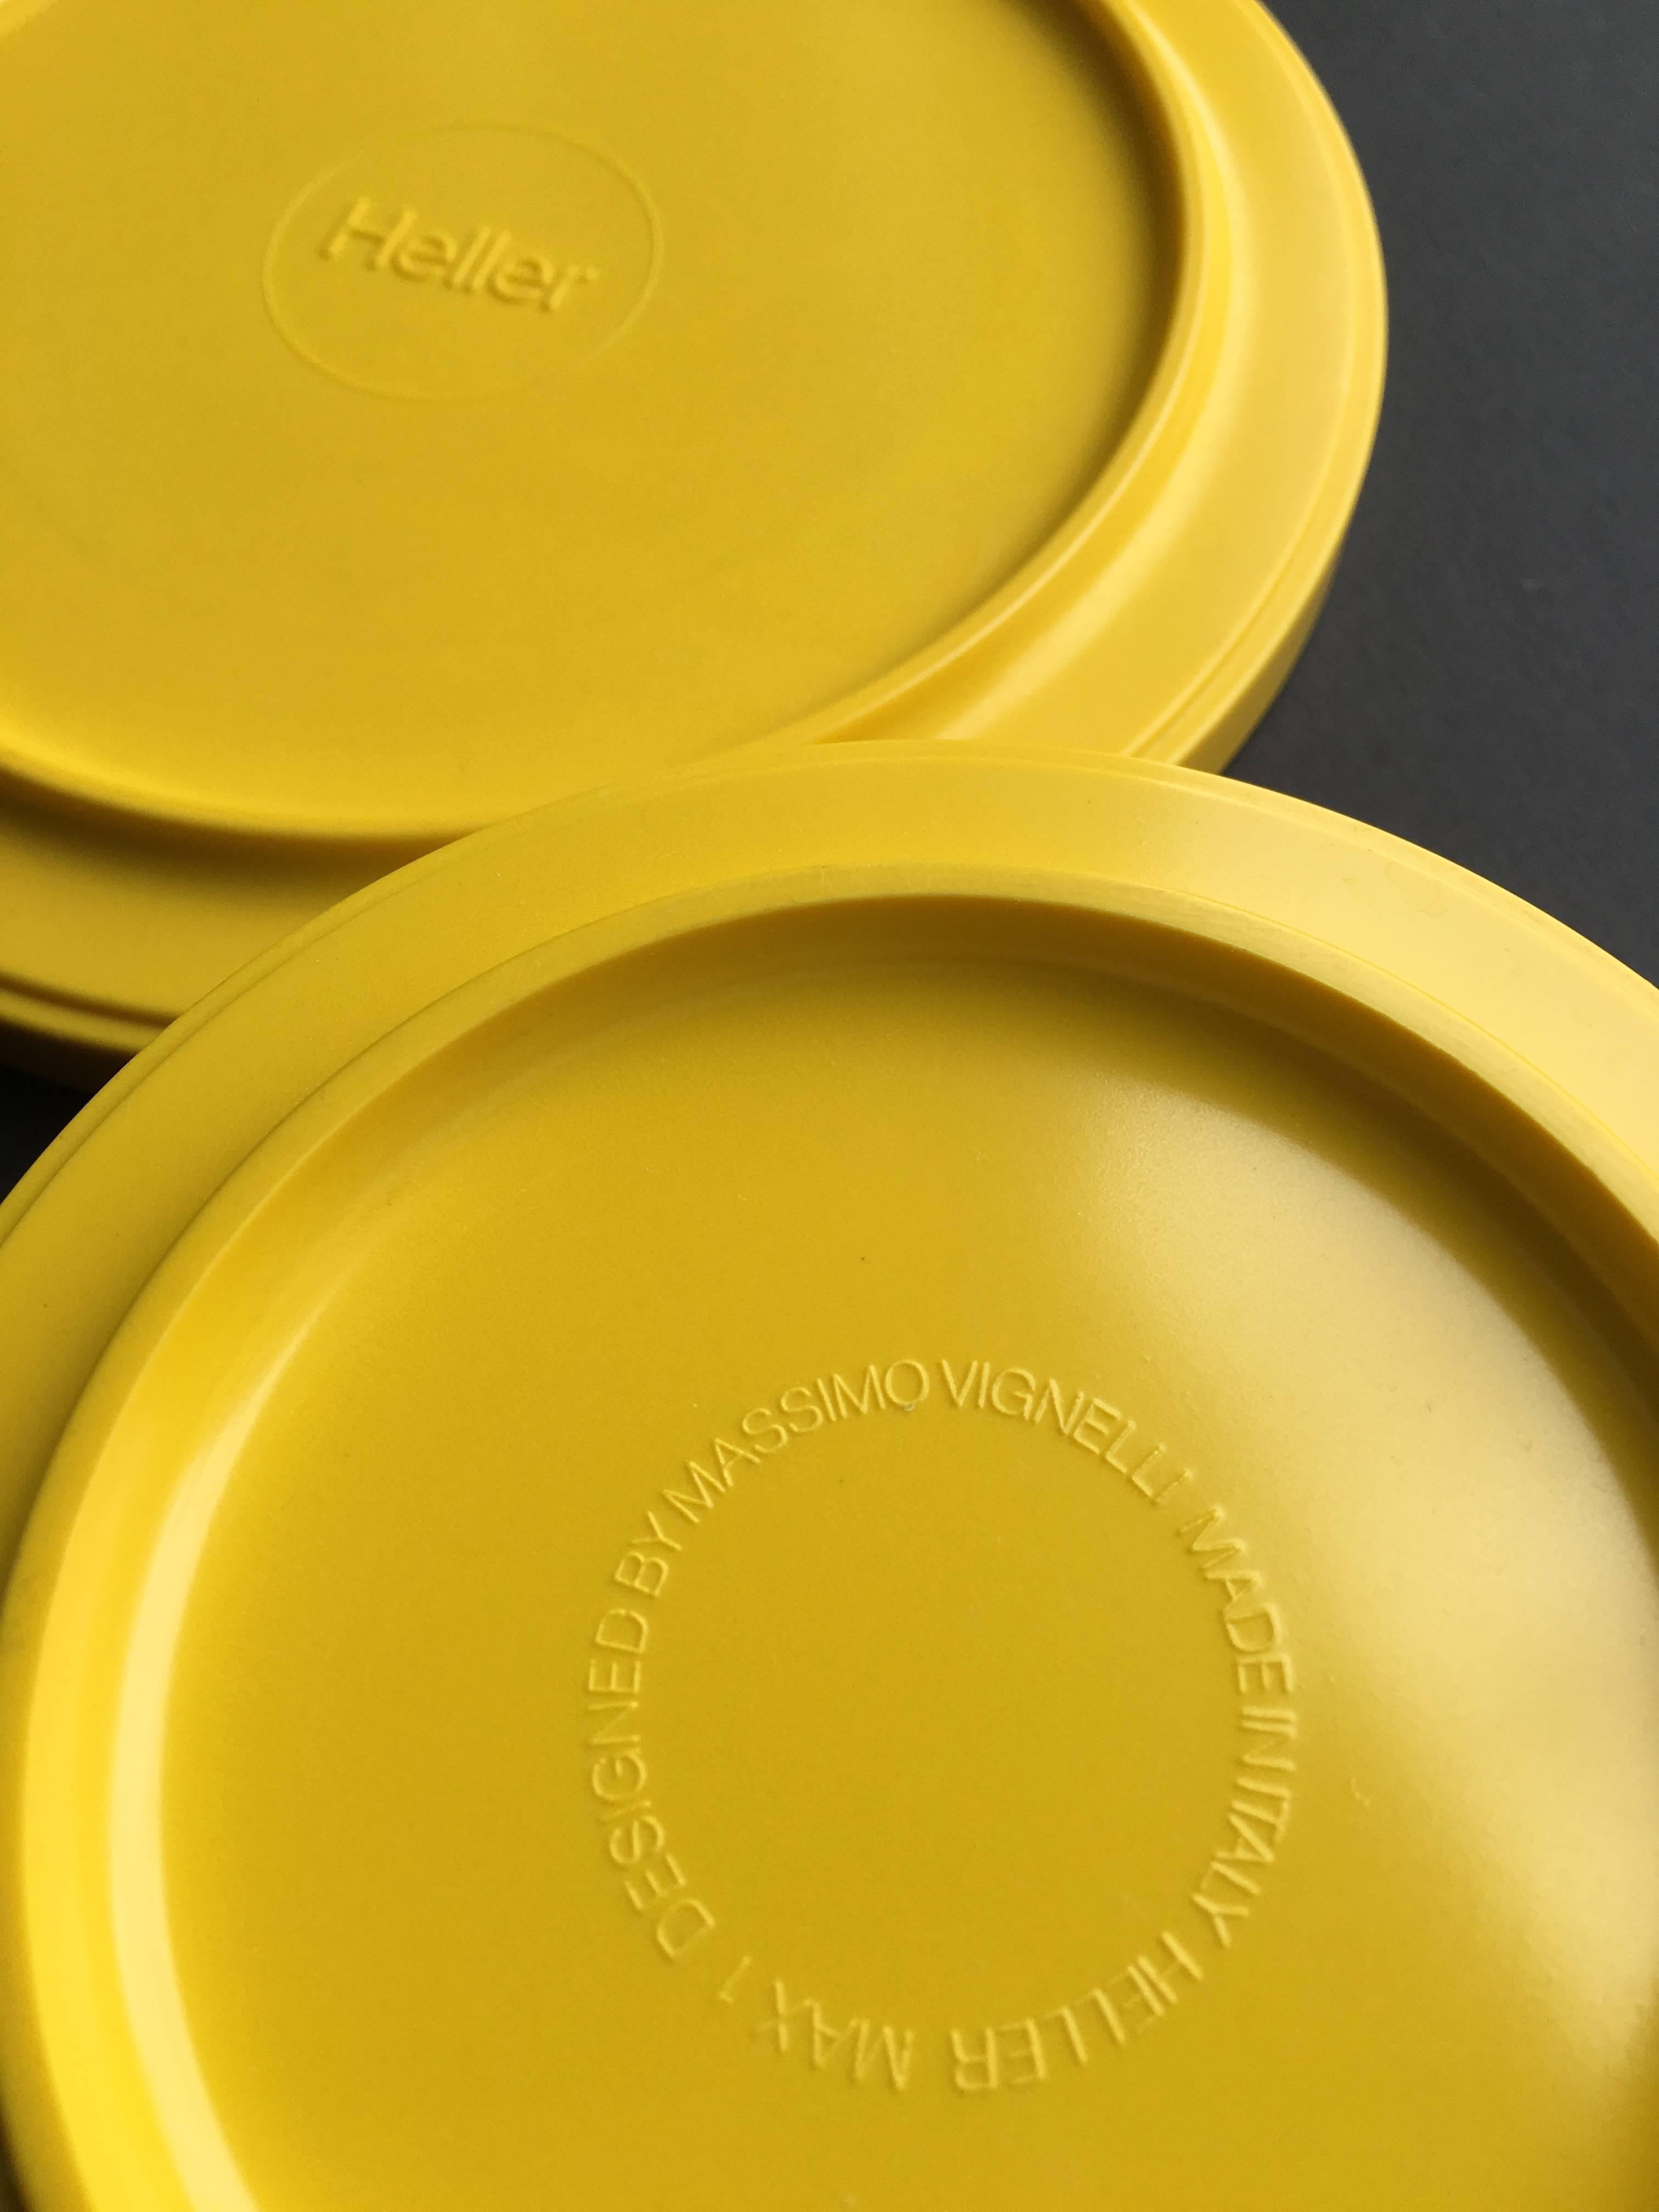 Iconic 46 piece collection of vibrant yellow melamine dinnerware designed by Massimo Vignelli for Heller. This compact, stackable design is in the permanent collection at the Museum of Modern Art and the Metropolitan Museum. Two plates by Dansk also